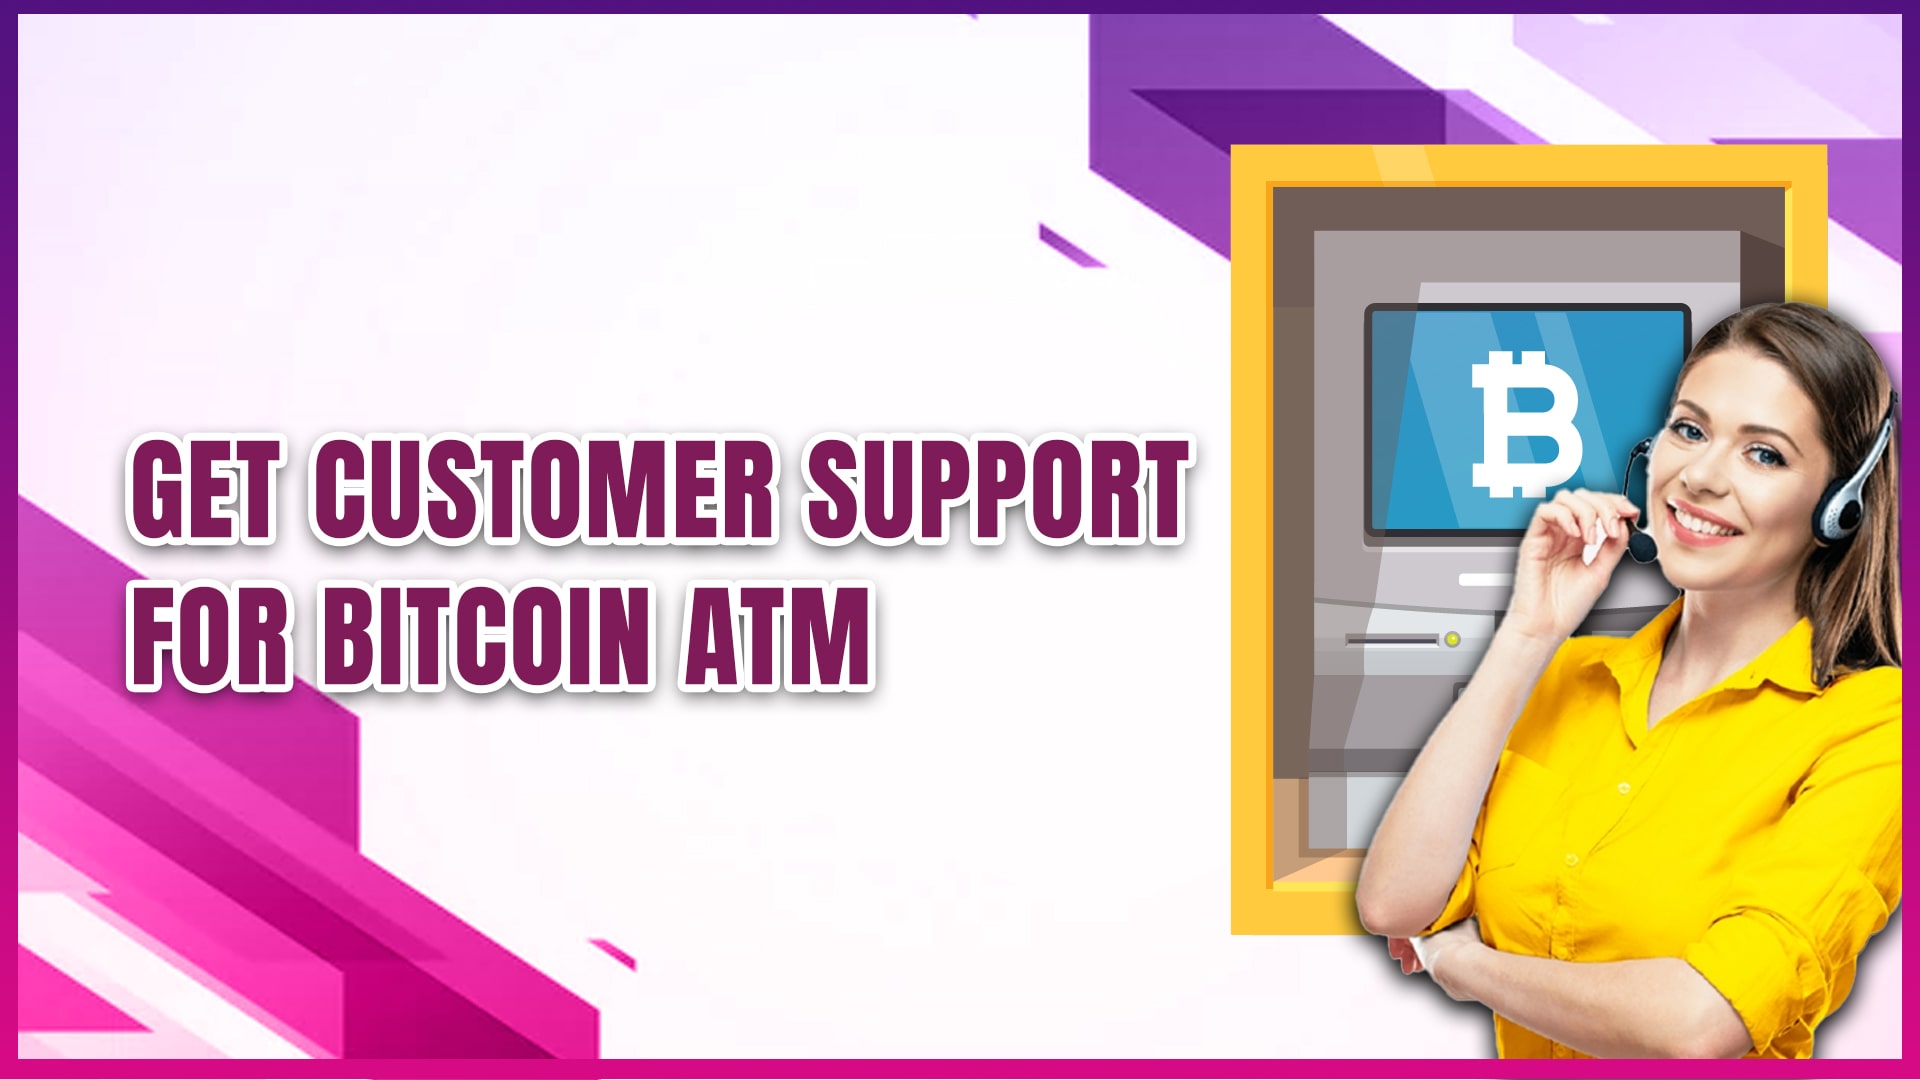 Get Customer Support For Bitcoin ATM